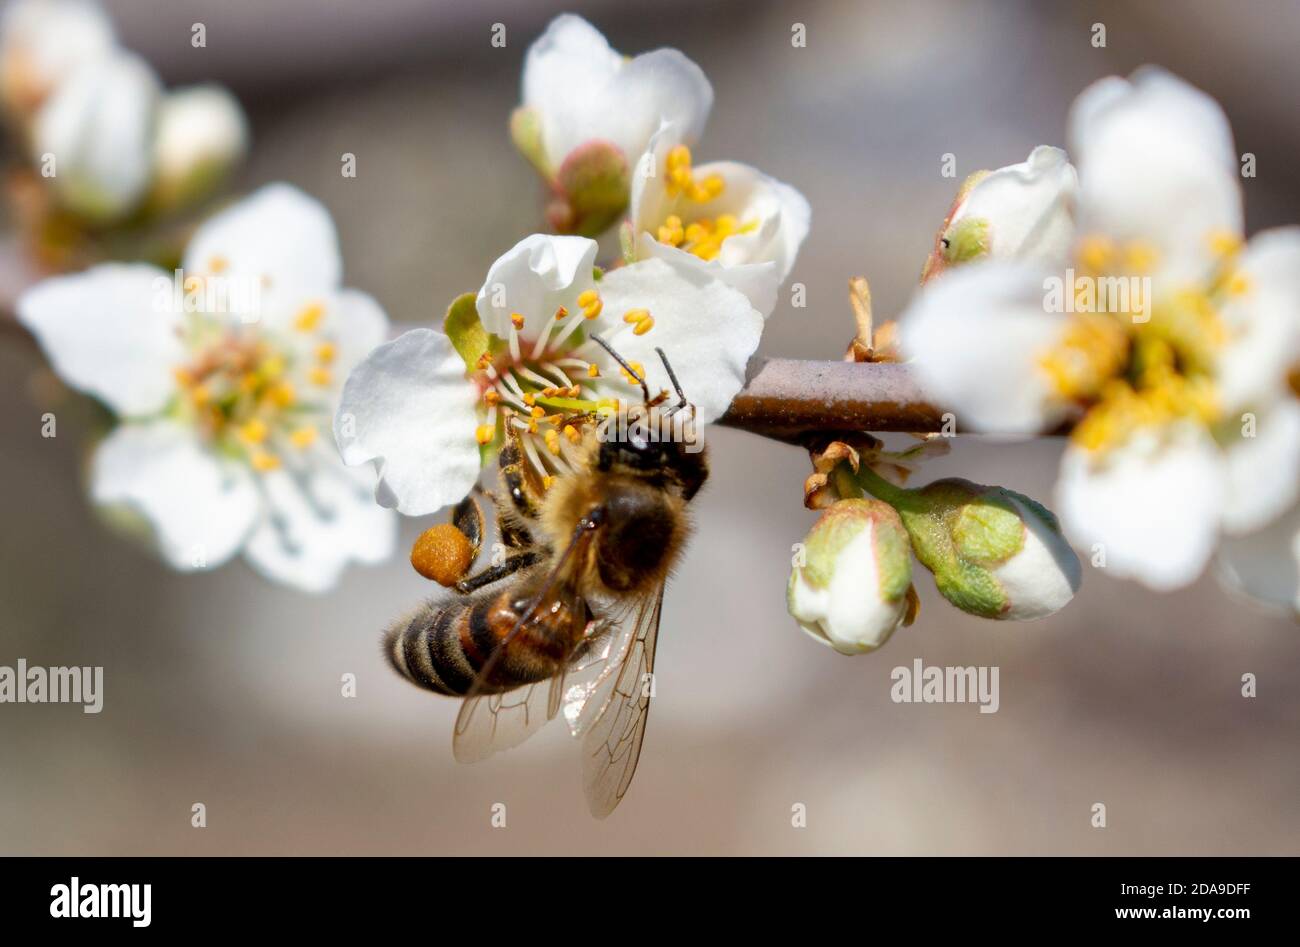 Beekeeping as a business, spring harvesting of honey from plum blossoms. Stock Photo